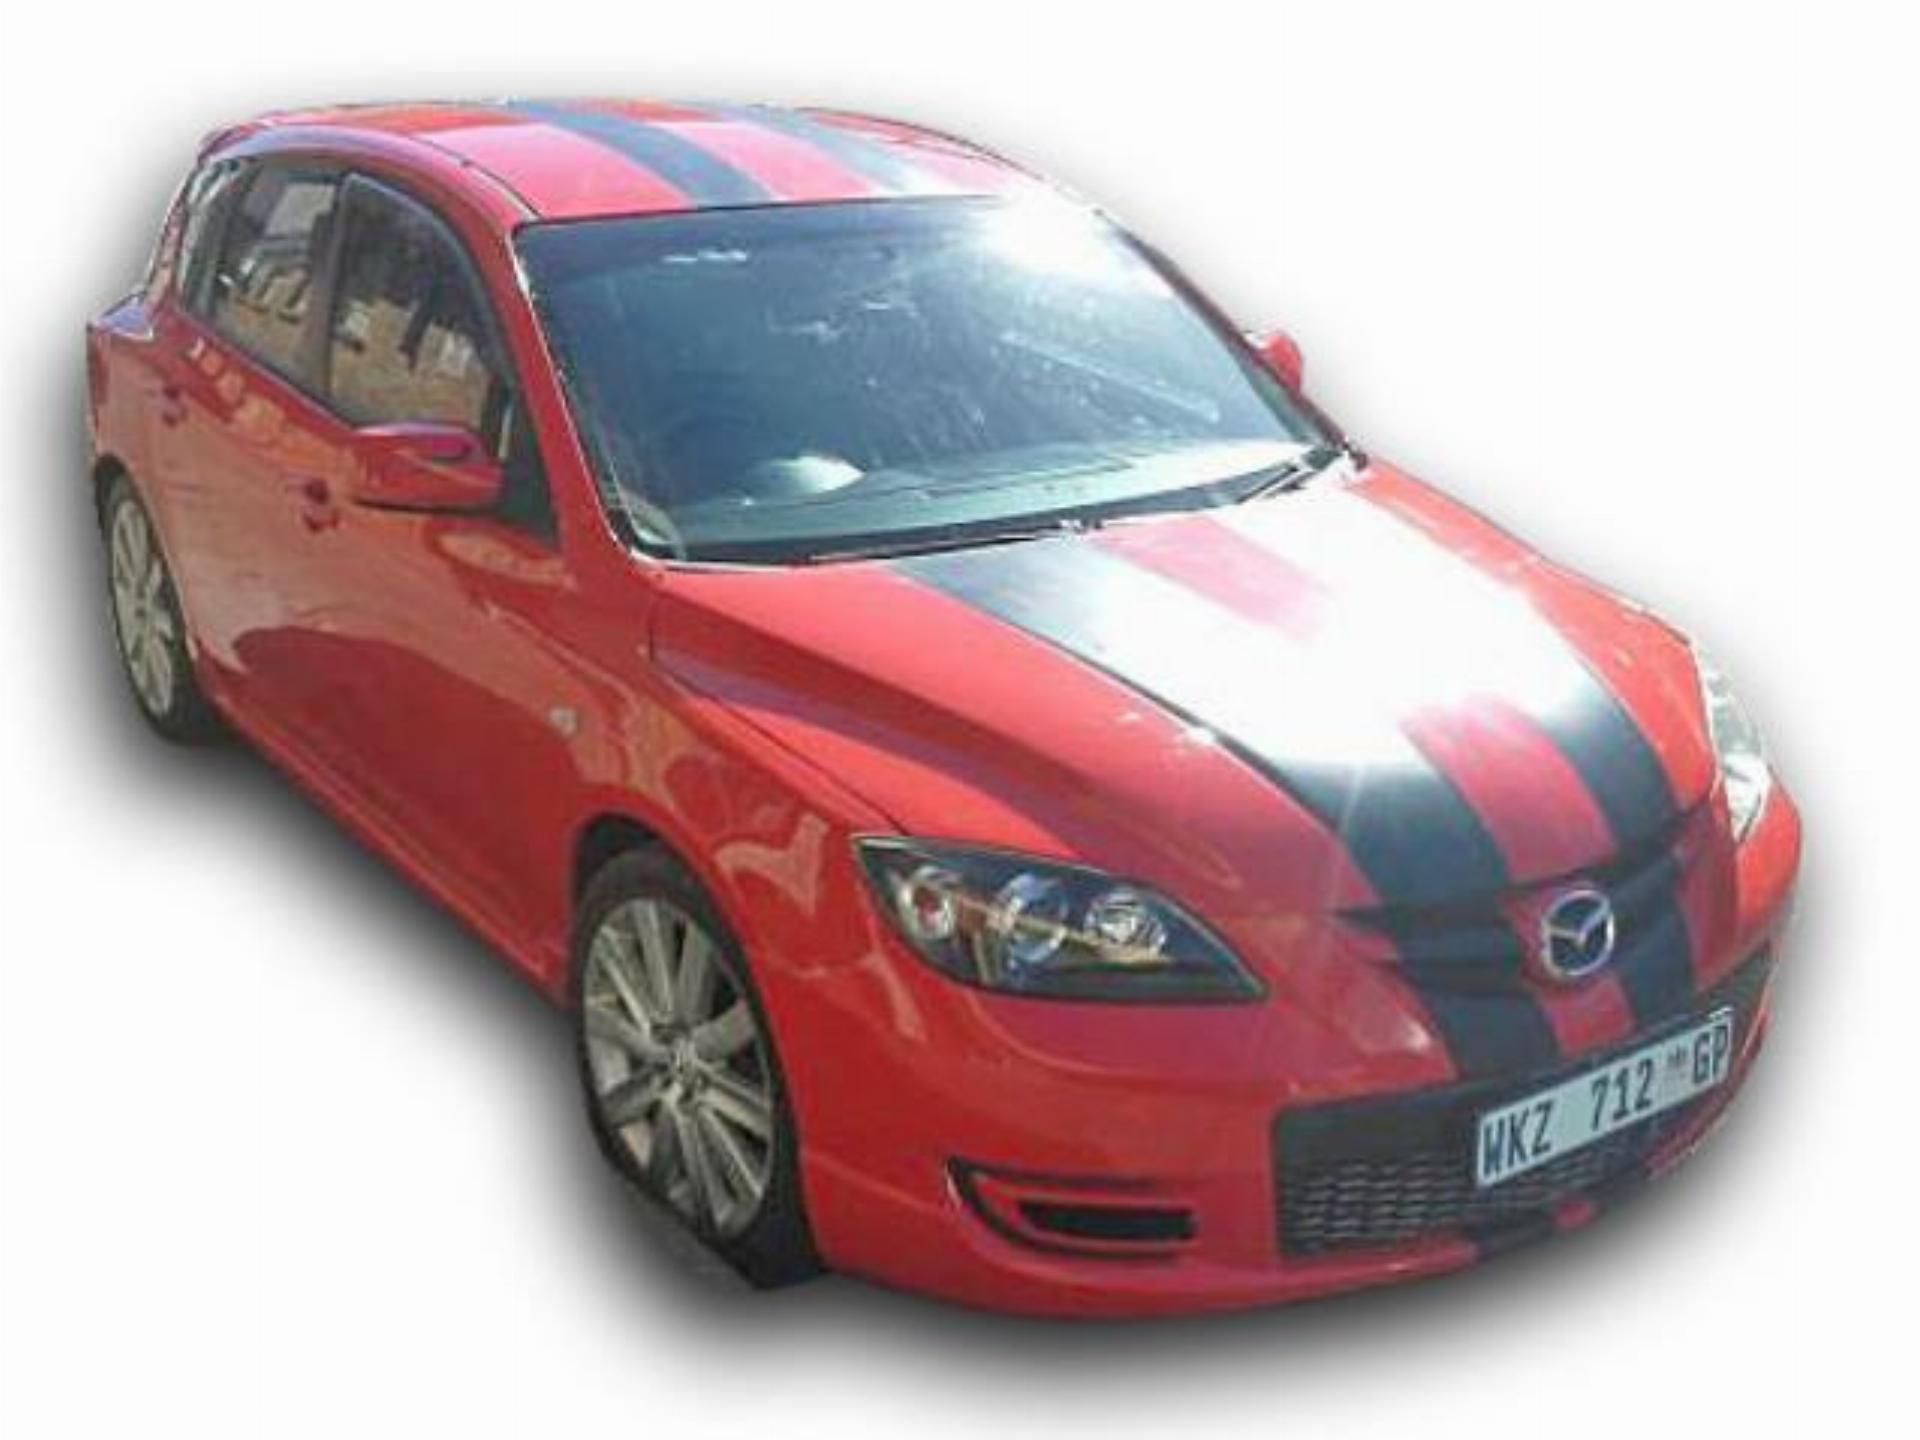 Used Mazda 3 MPS Sport 2007 on auction PV1018648